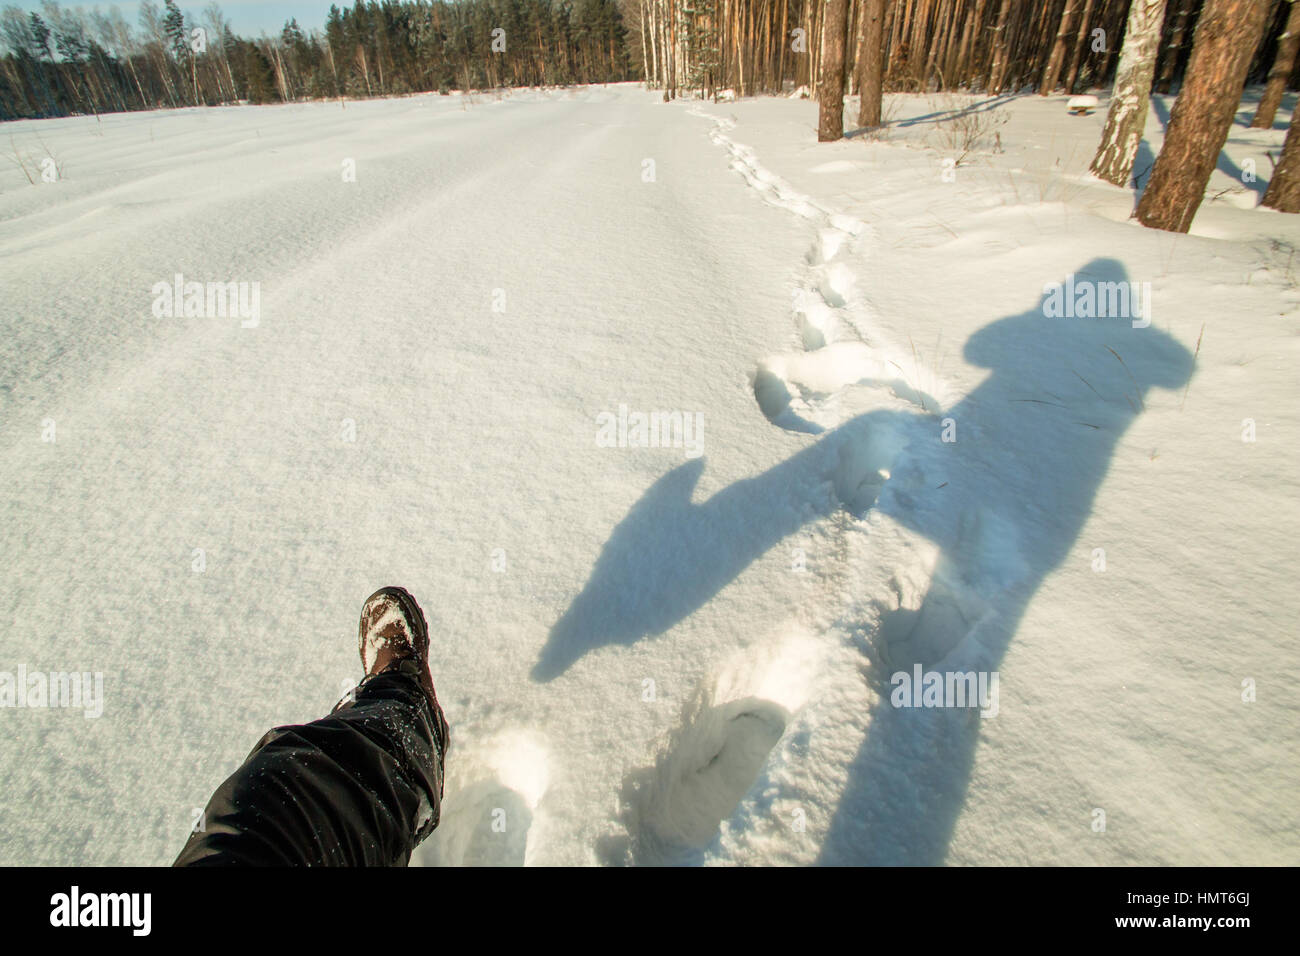 man in the woods makes selfie. Selfies time on snow Stock Photo